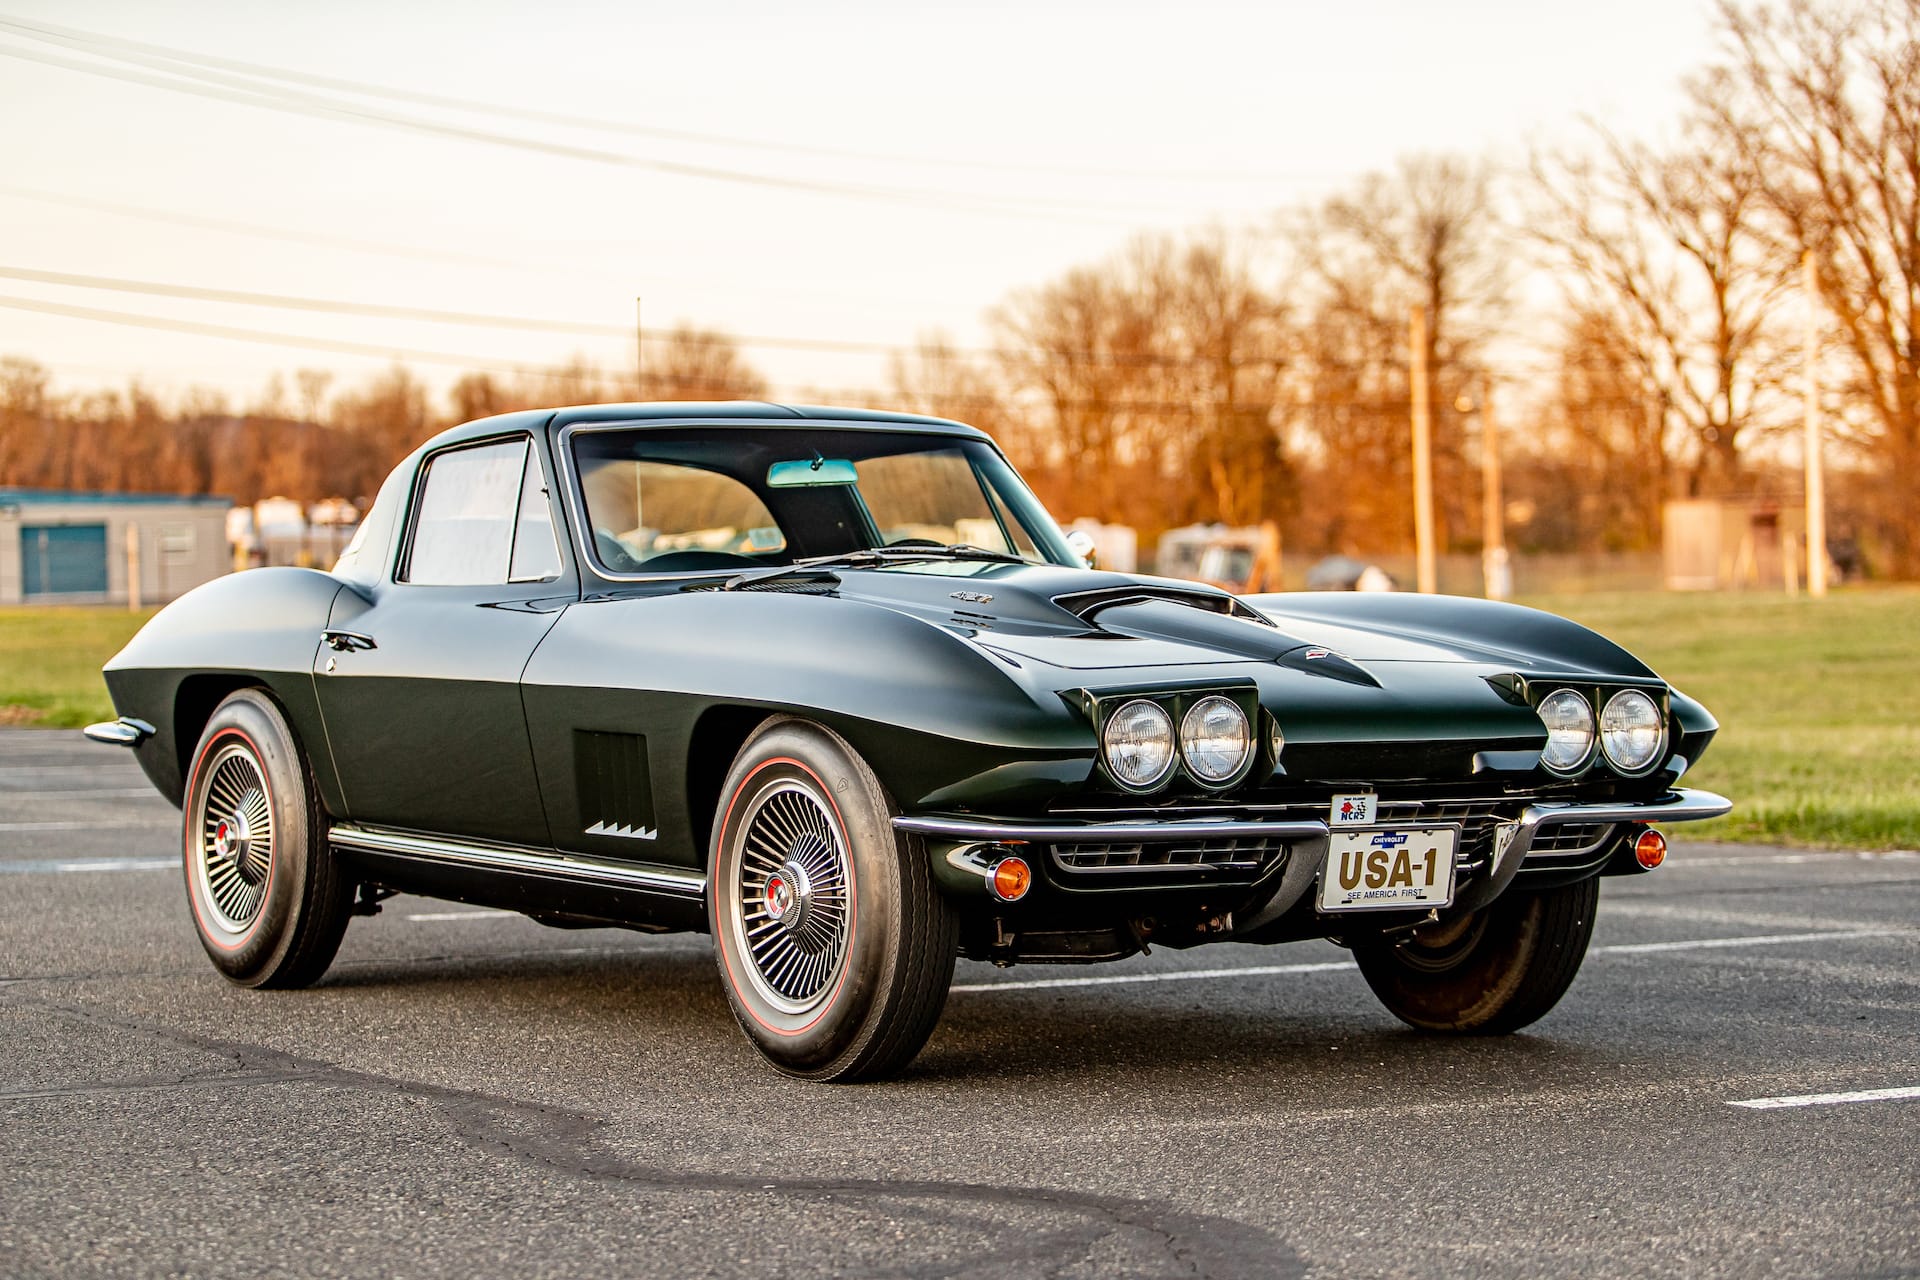 1967 Chevrolet Corvette Sting Ray 427/435 Coupe up for auction 